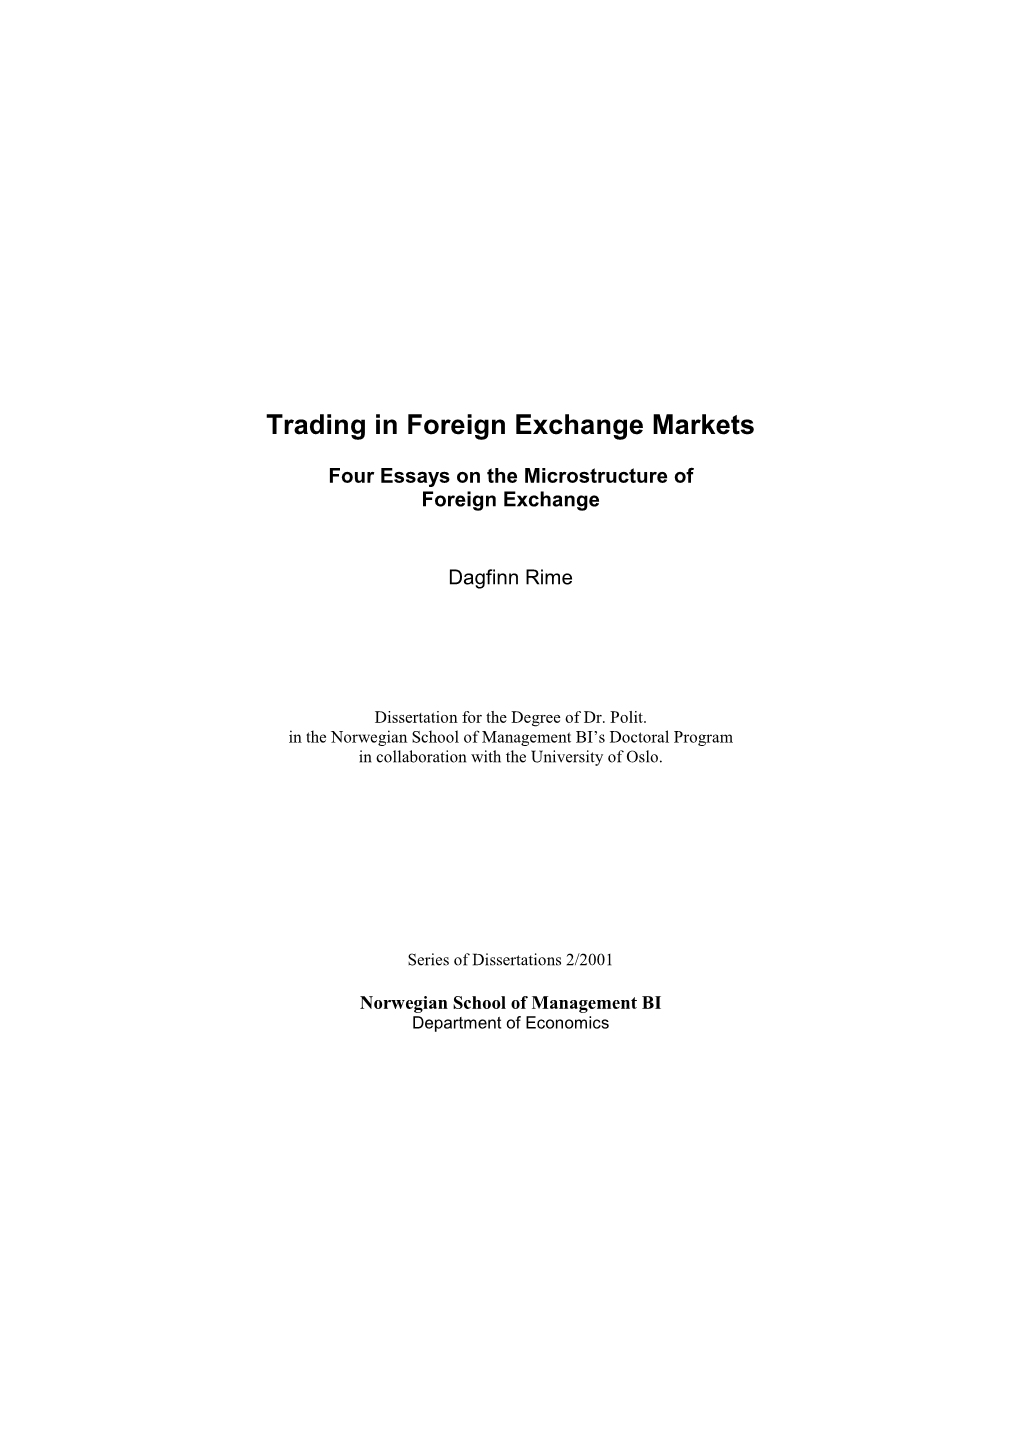 Trading in Foreign Exchange Markets